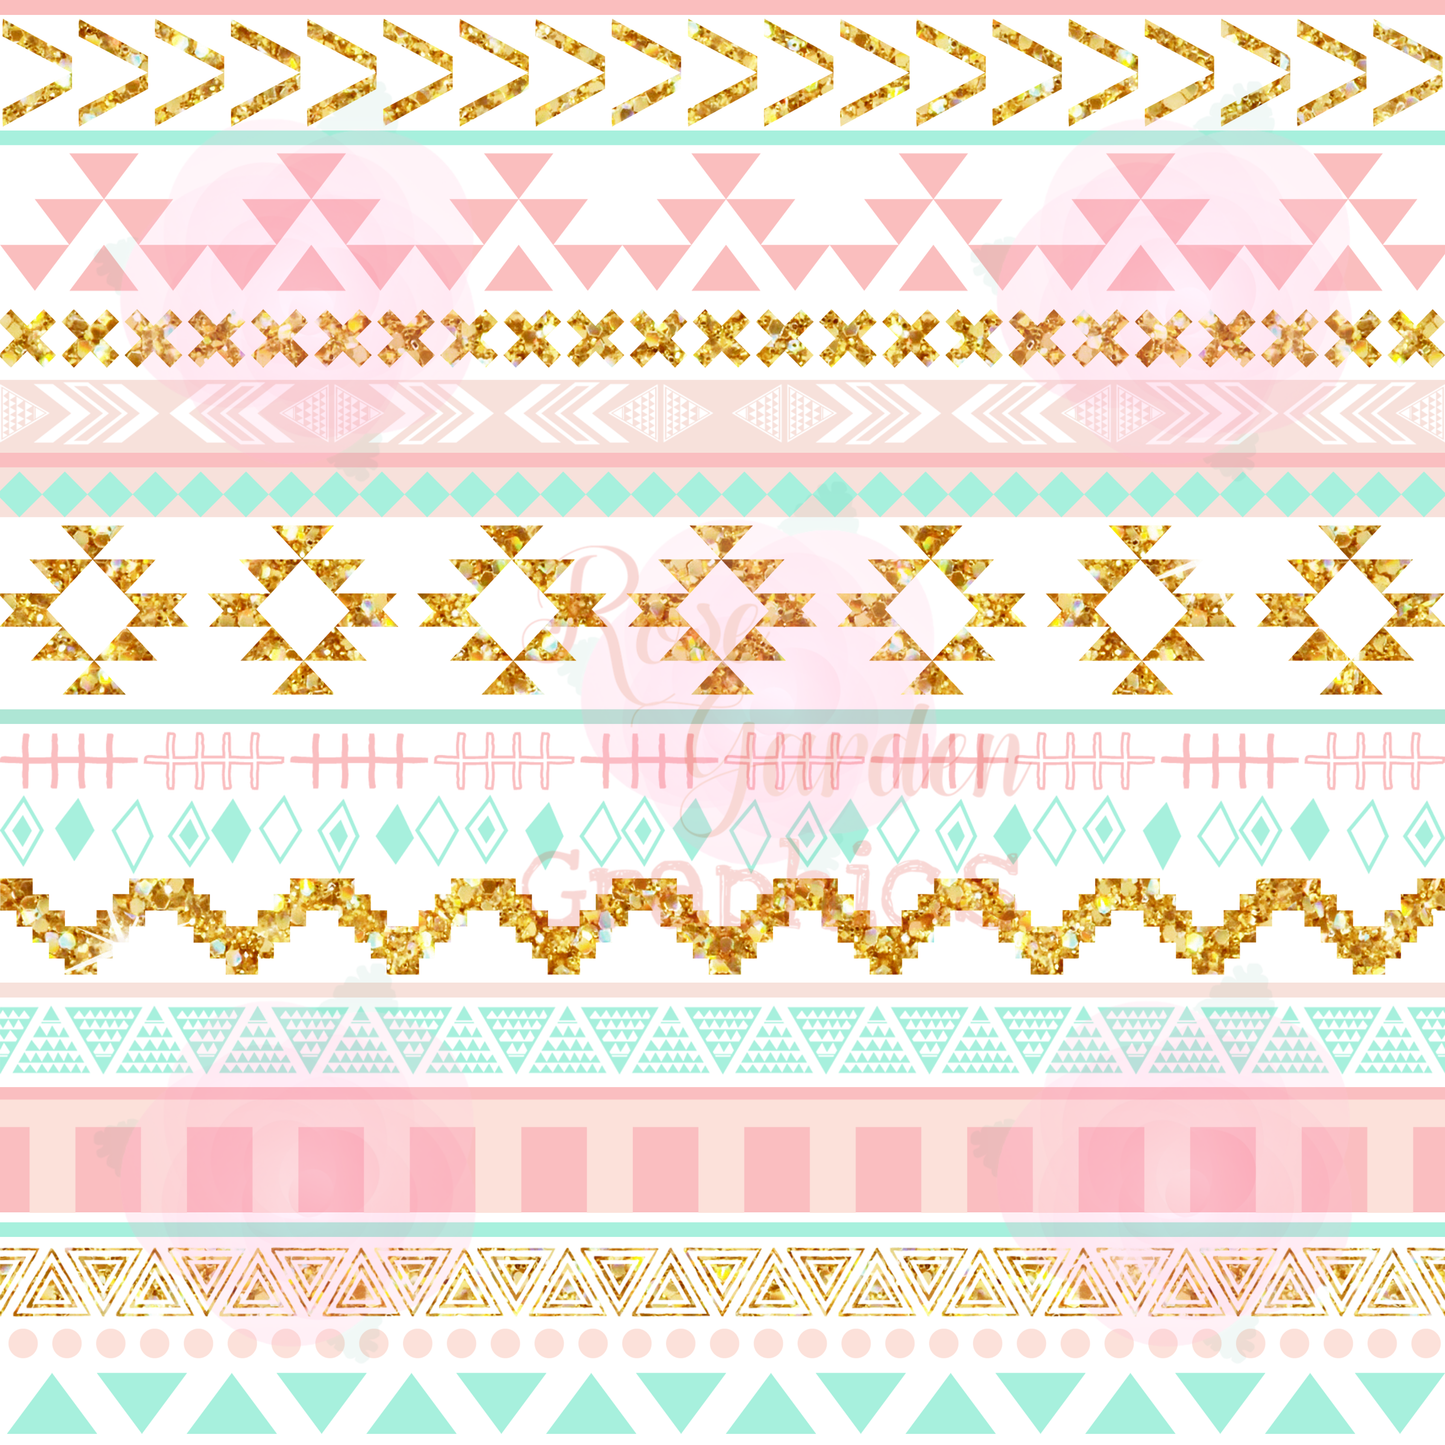 Aztec Stripes (Pink, Mint, and Gold) Seamless Image